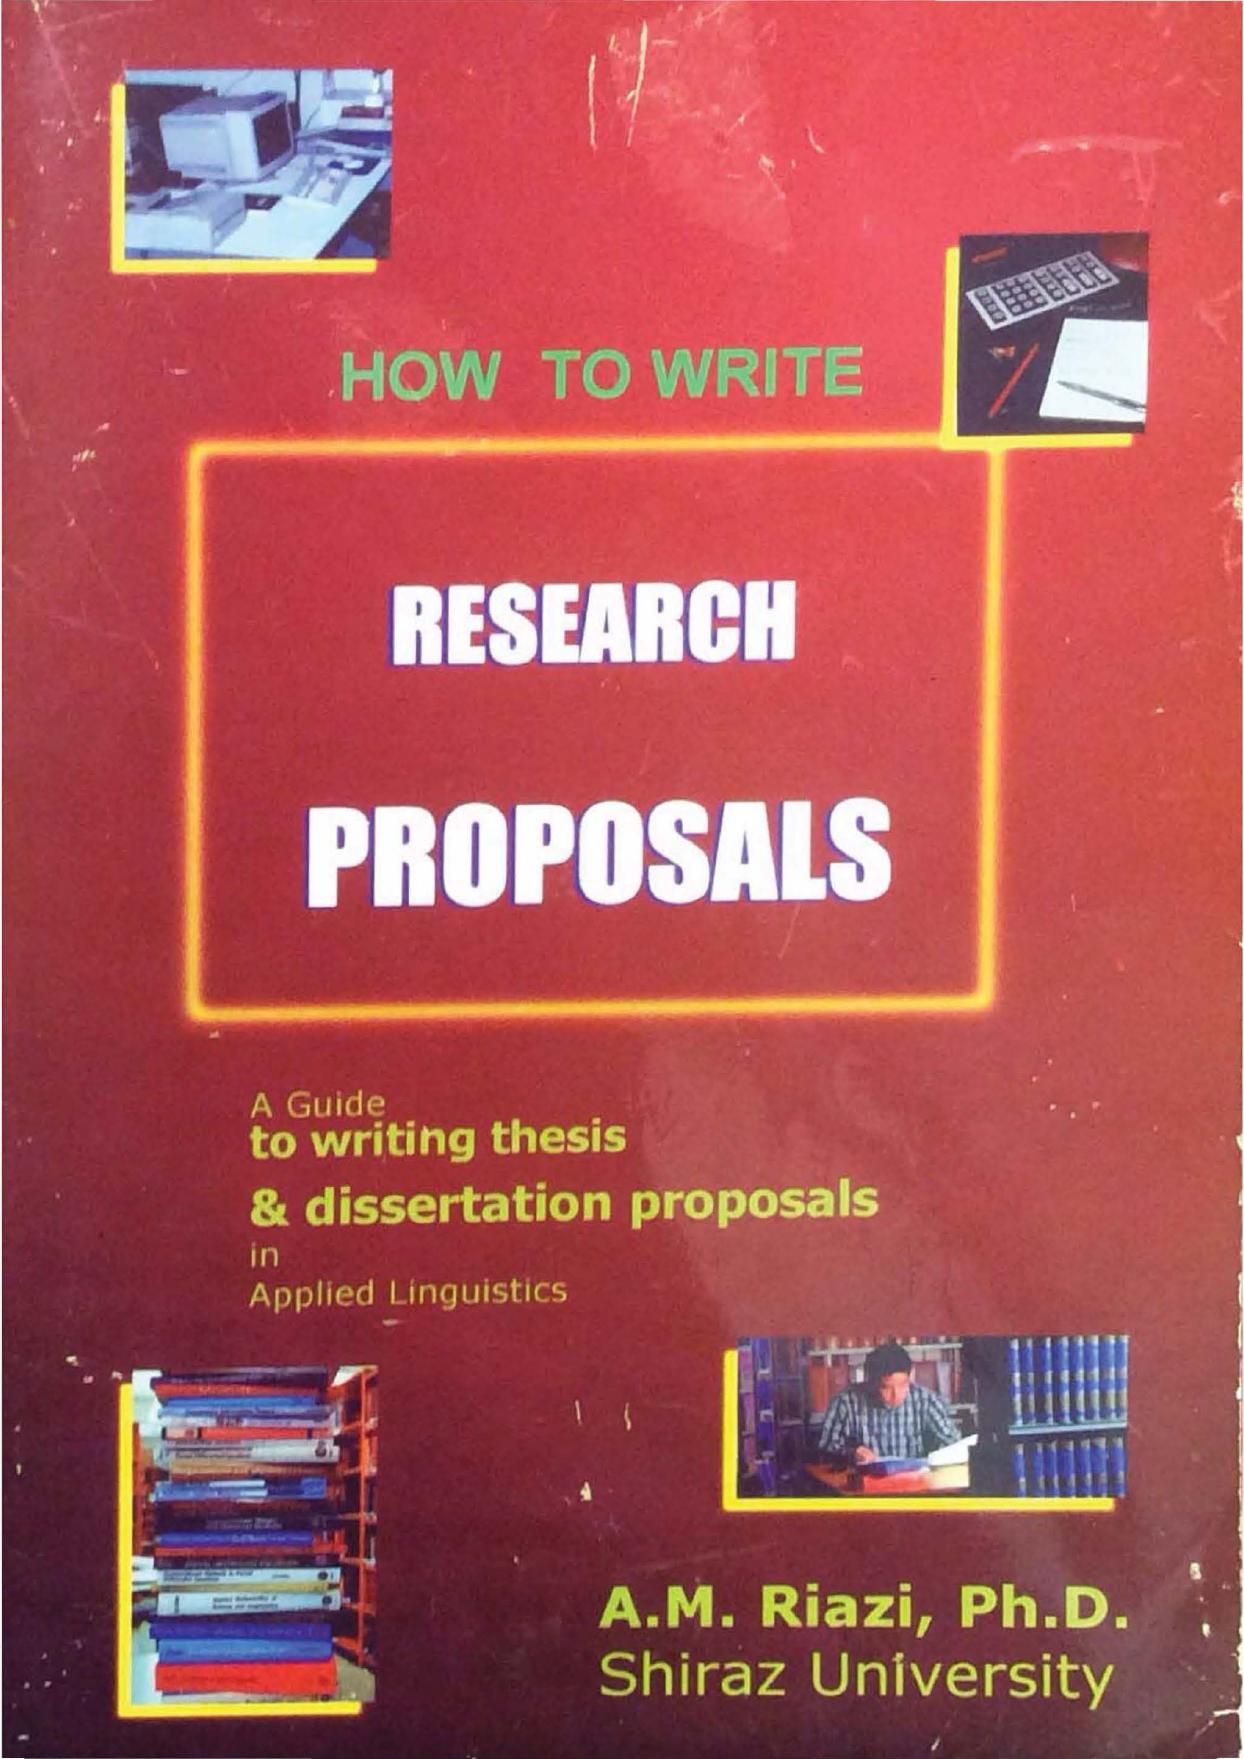 How to Write Research Proposals